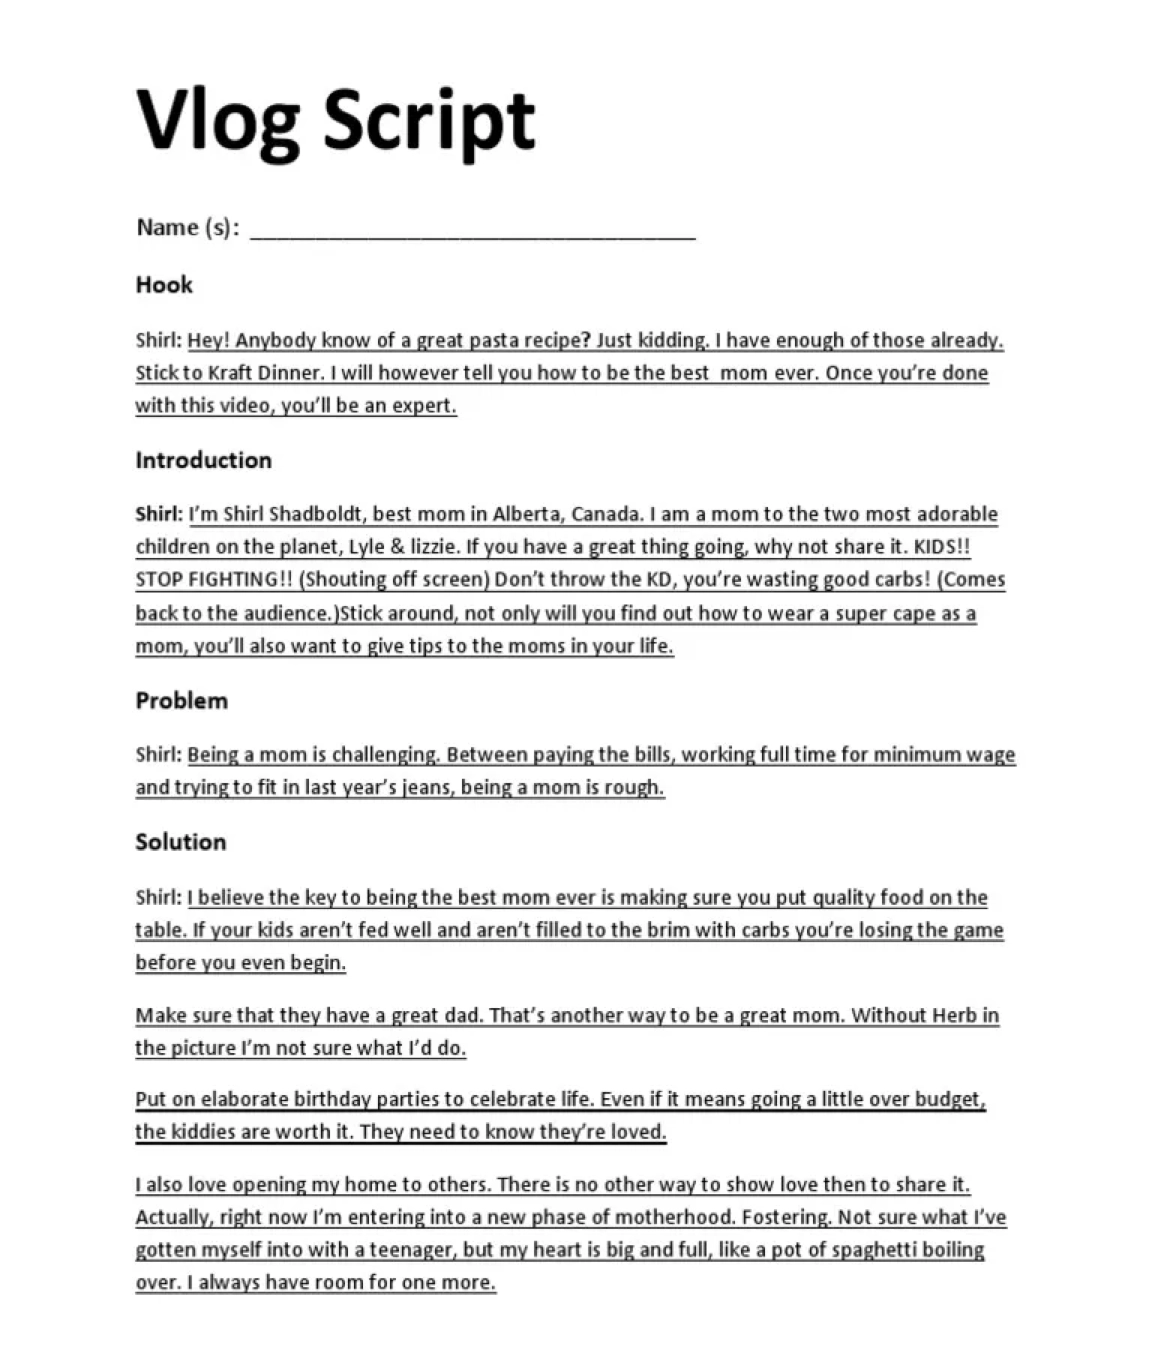 Vlog vs Blog: Which is Better for You?